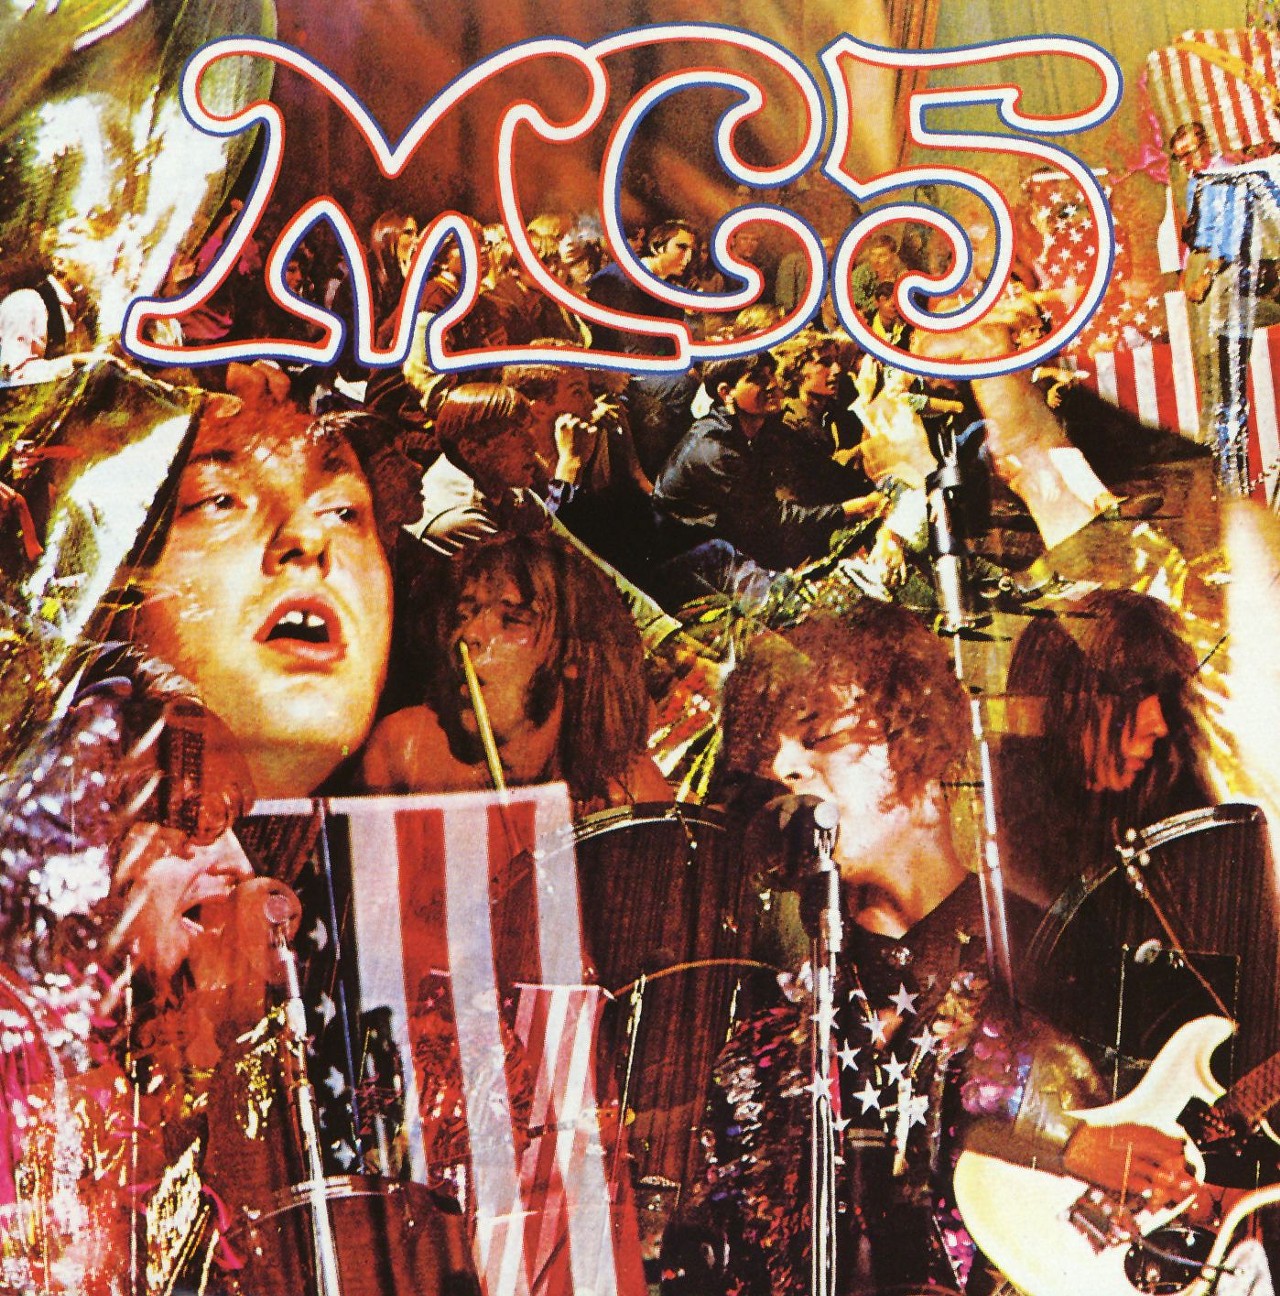 MC5 - Kick out the Jams (1969)
There are flags all over this album cover, but the most memorable part of Kick out the Jams is the line, "Kick out the jams, motherfucker." The line was included inside the album's jacket and as the opening to "Kick out the Jams," and managed to stir up controversy with a department store that eventually lead to a censored version of the album and the artwork. Eventually it even forced its label, Elektra to drop the band.